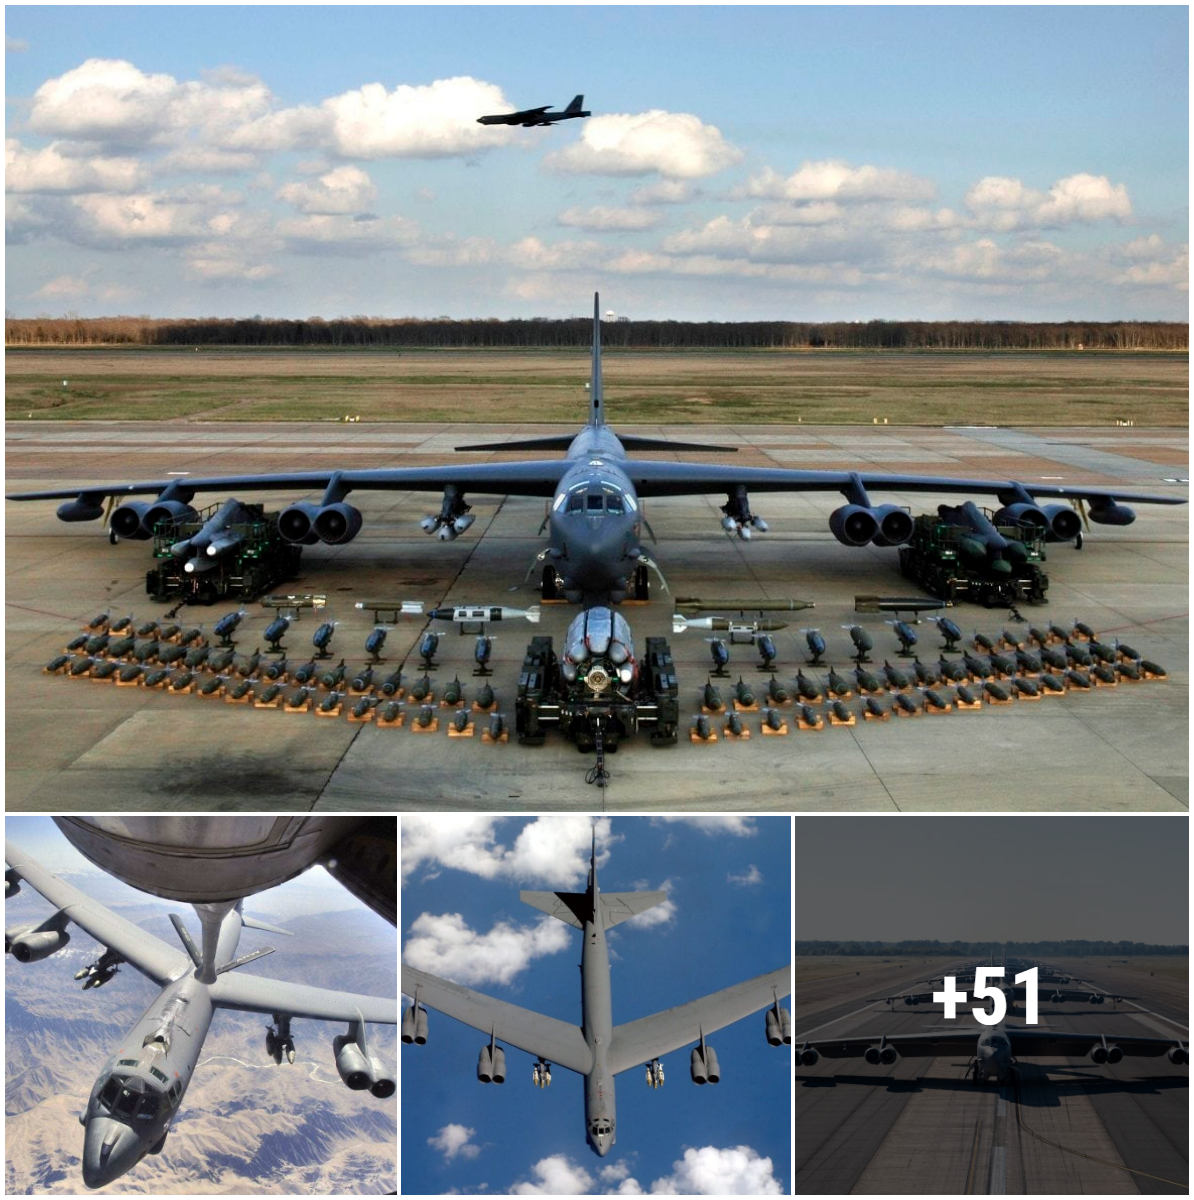 16 photos depicting the machine leading the game. B-52 aircraft